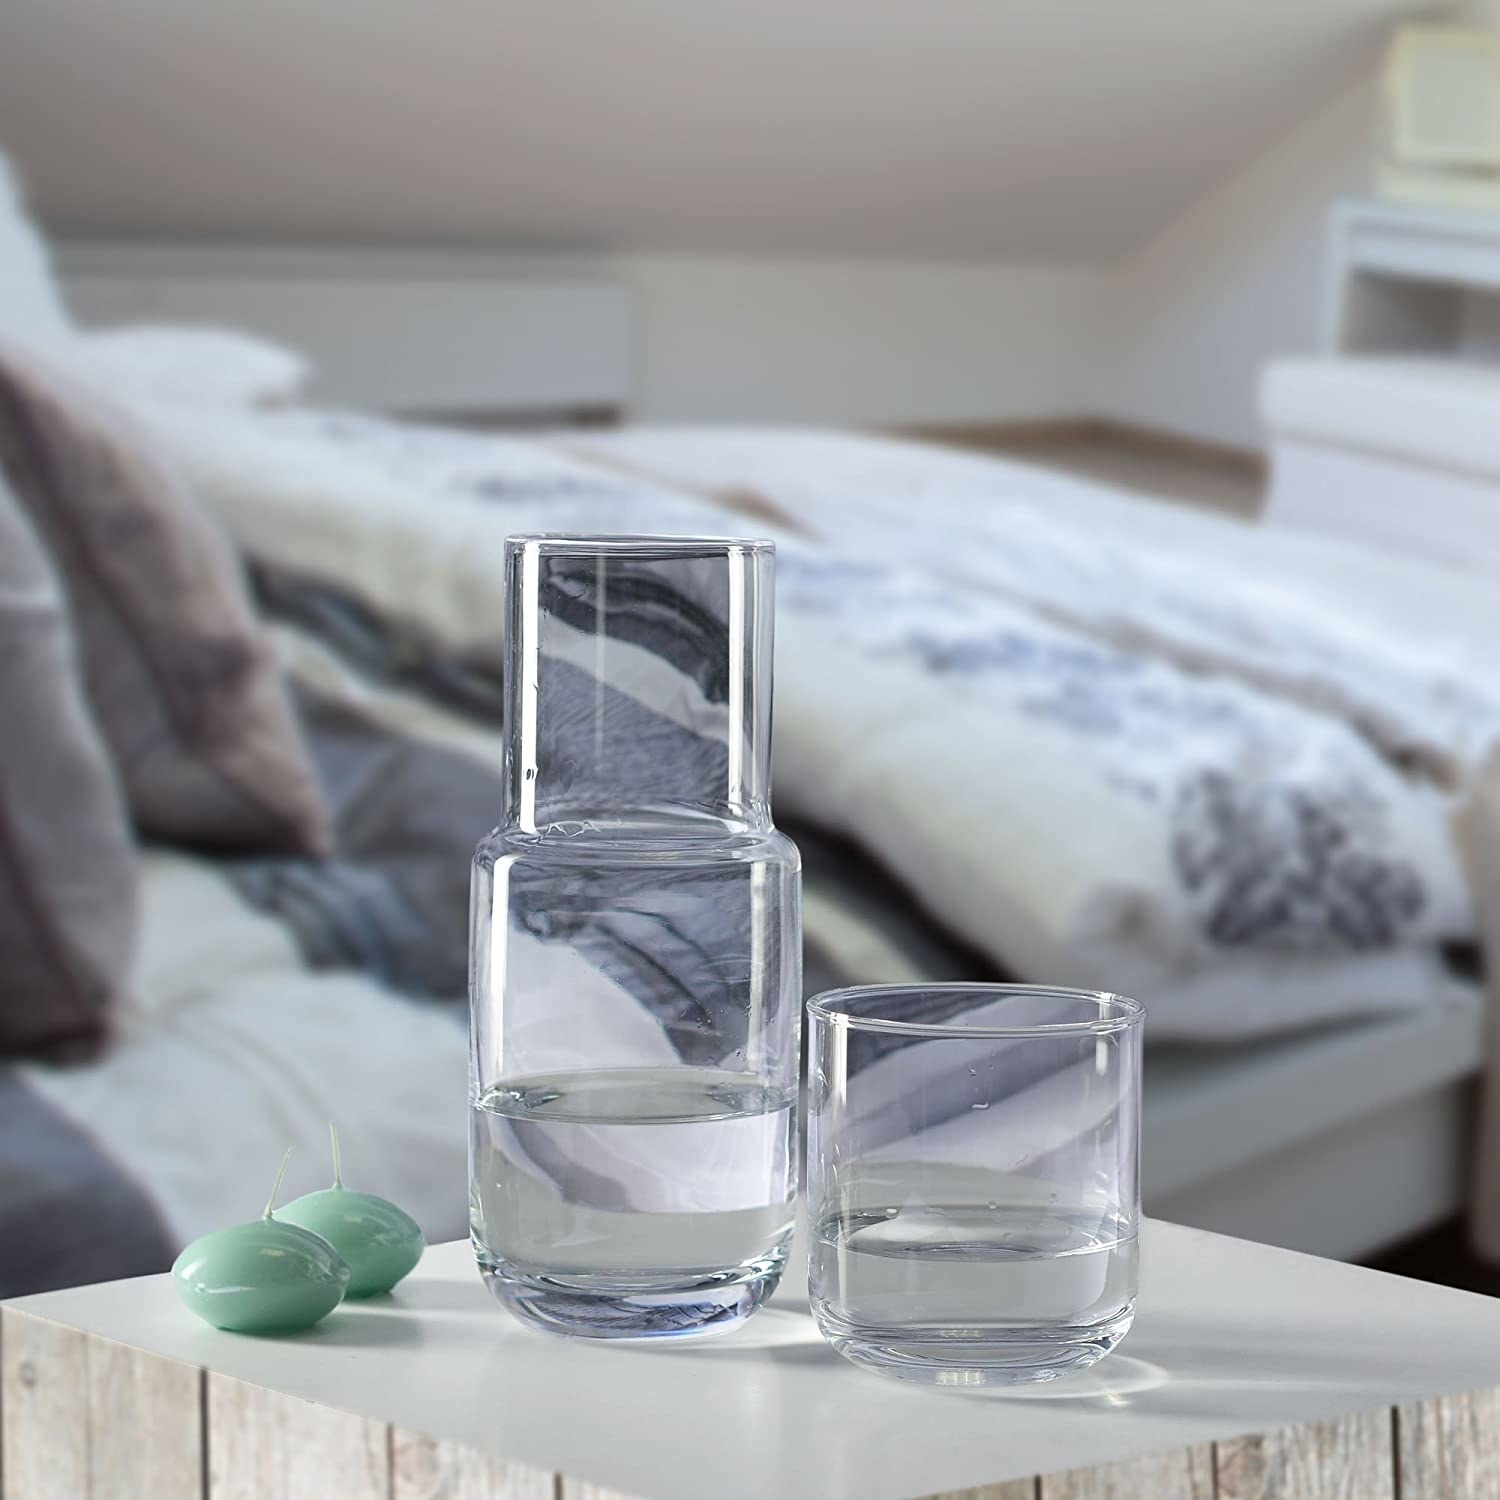 A glass carafe with a matching glass perched on a bedside table